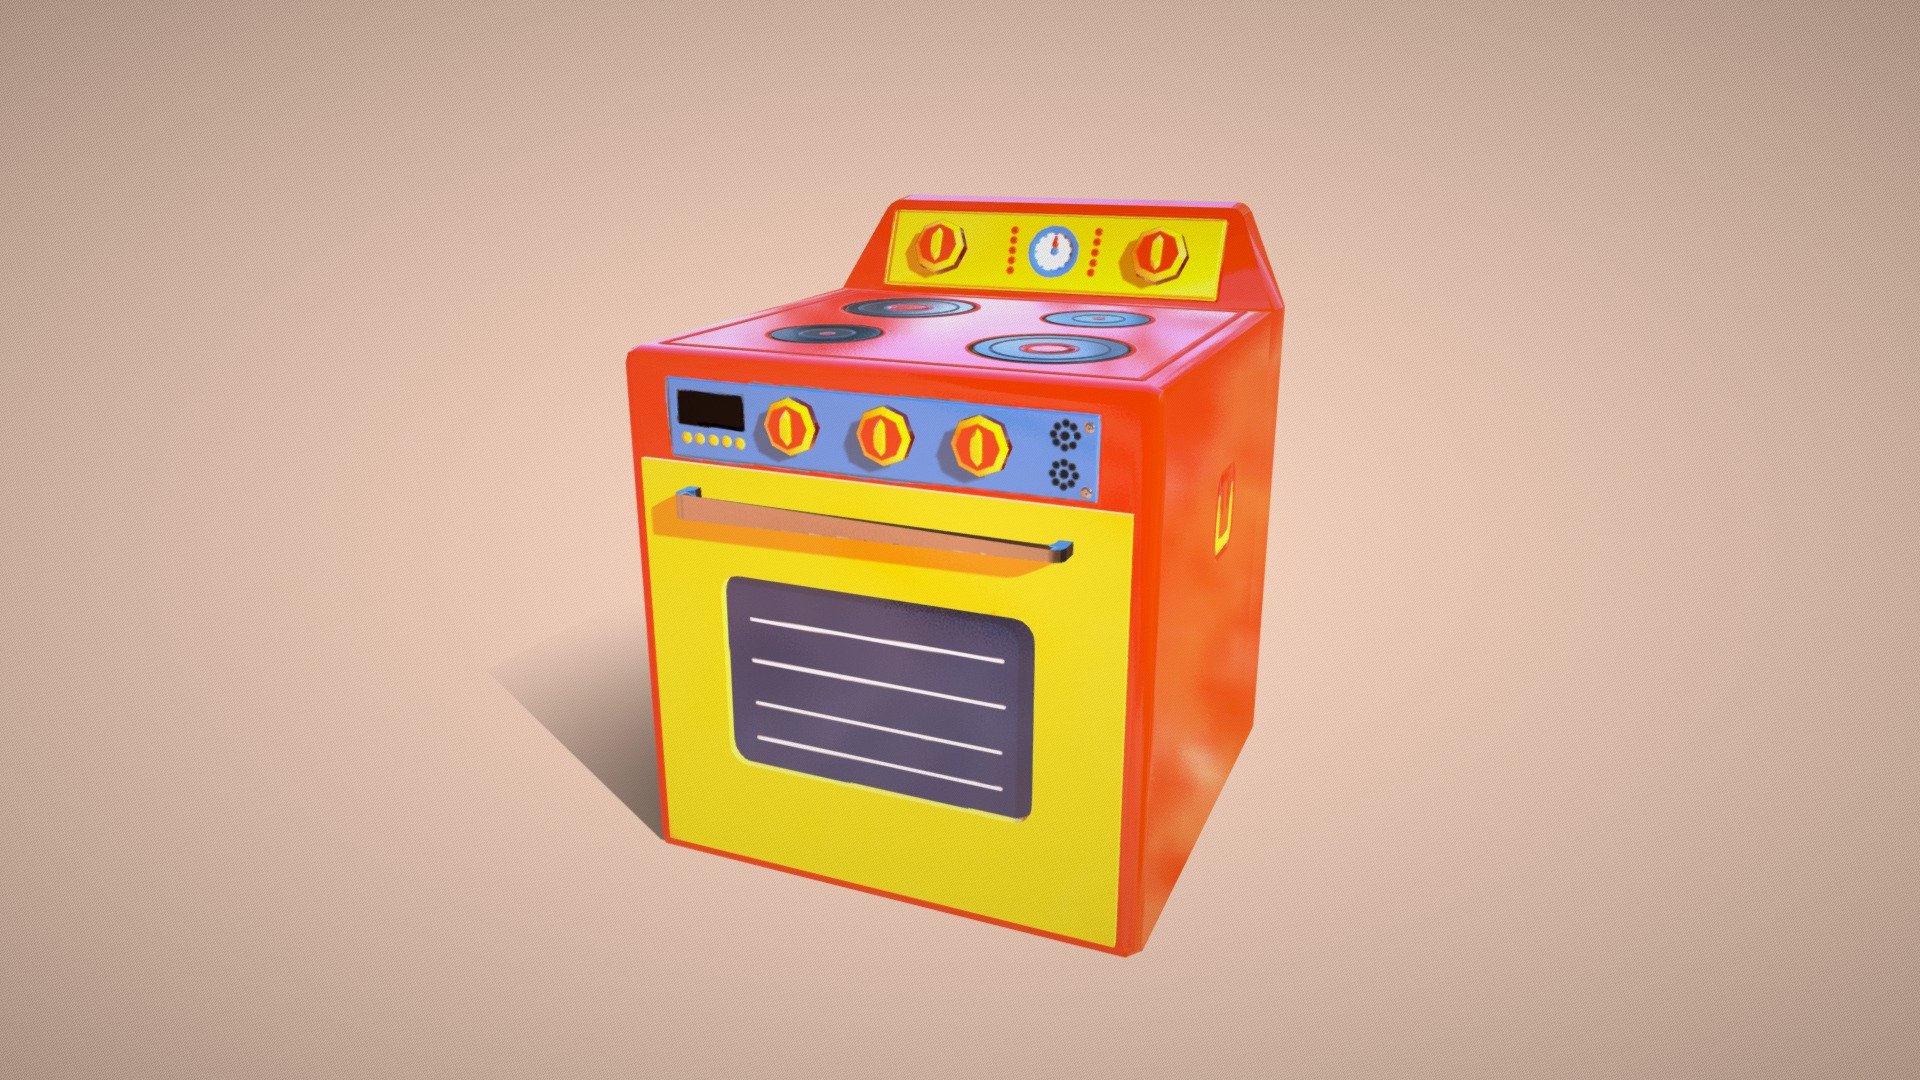 A cute kitchen oven to continue my collection of kitchen furniture !

Still made witch Maya and substance painter 3d model